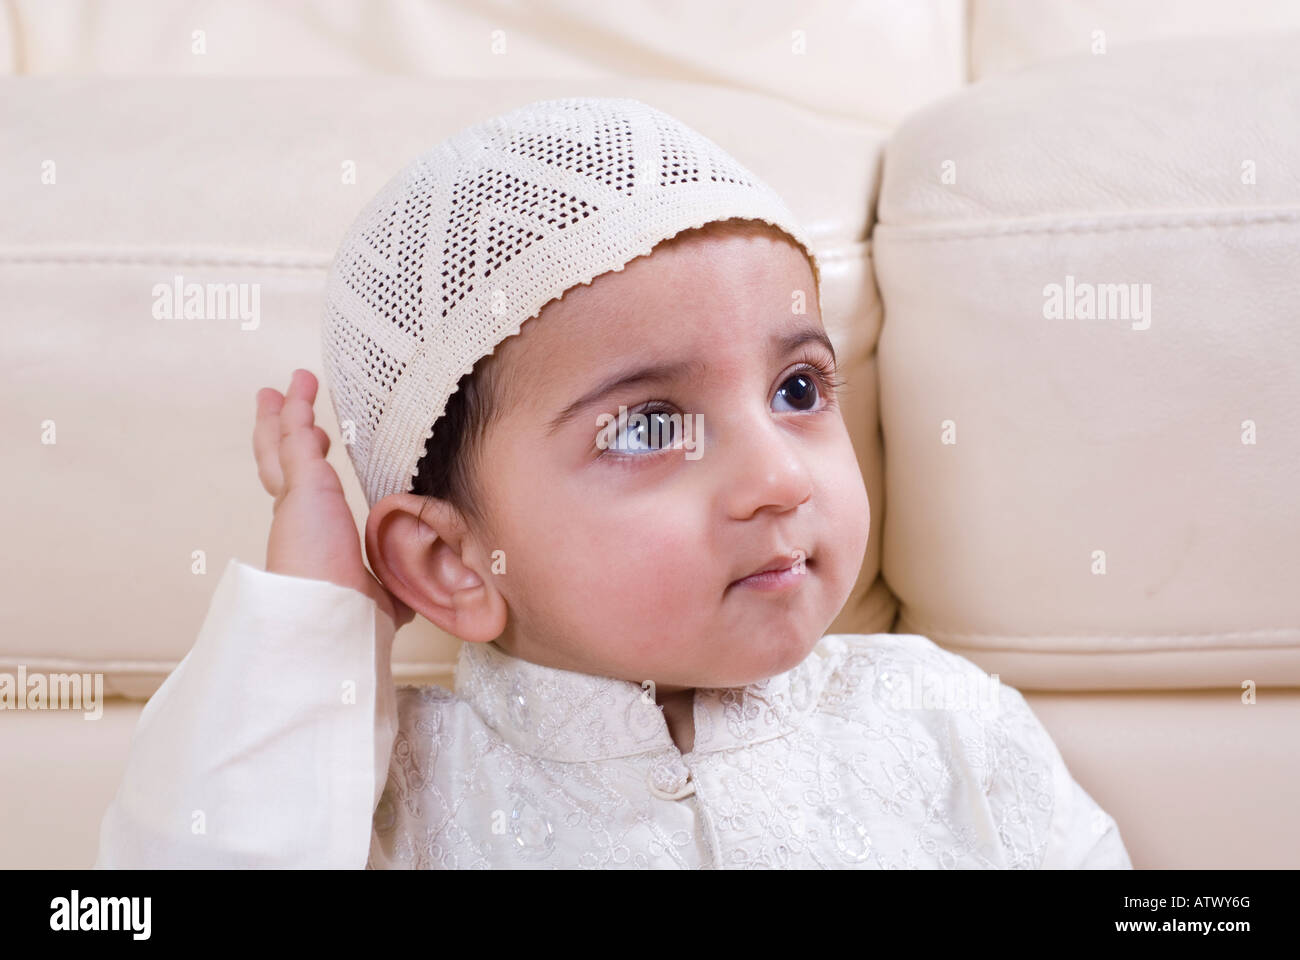 Cute Muslim baby in traditional Islamic clothing looking up hand ...